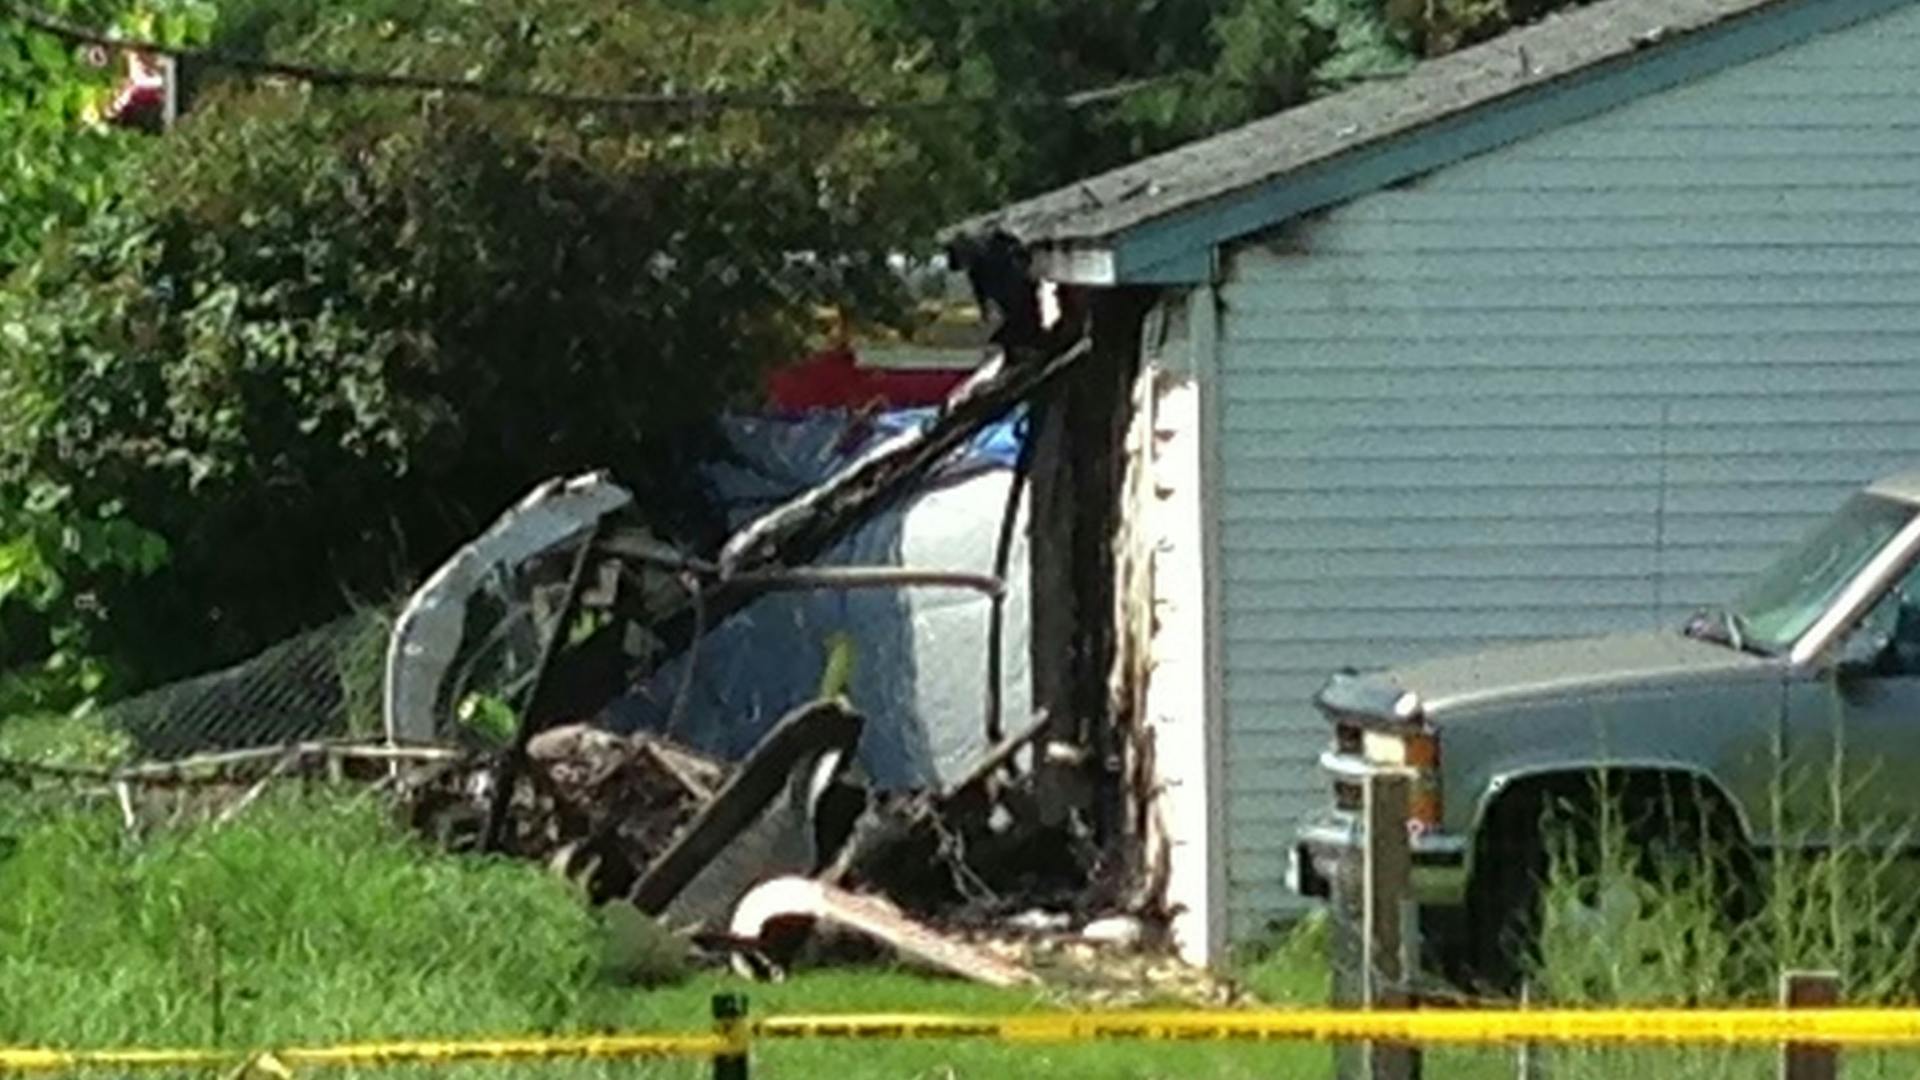 A helicopter crashed into a garage, narrowly missing a house near the Maplewood Nature Center according to witnesses at the scene.